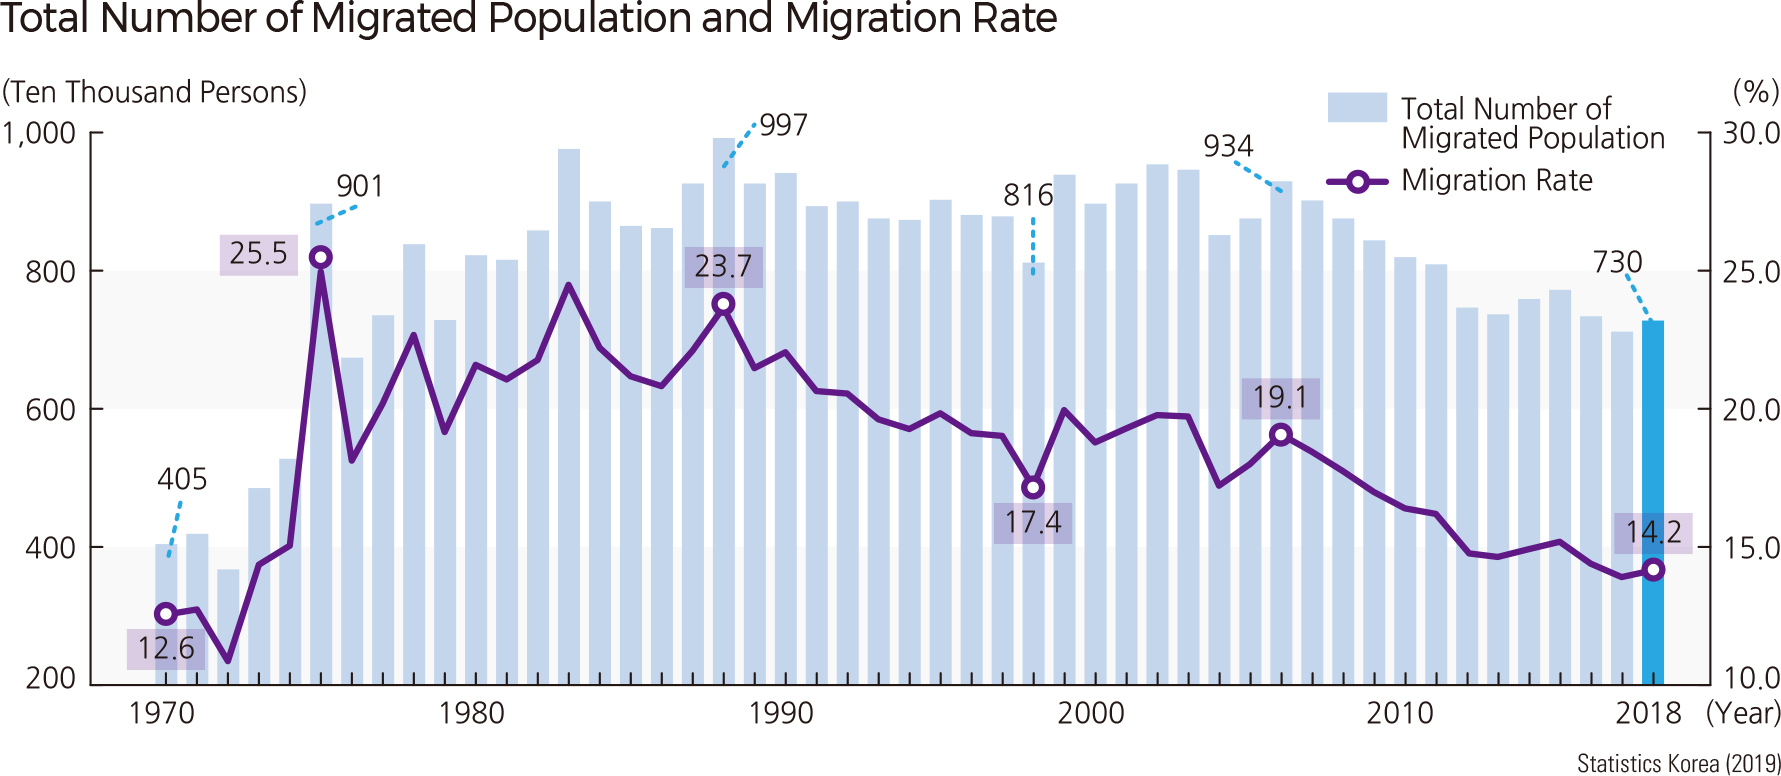 Total Number of Migrated Population and Migration Rate